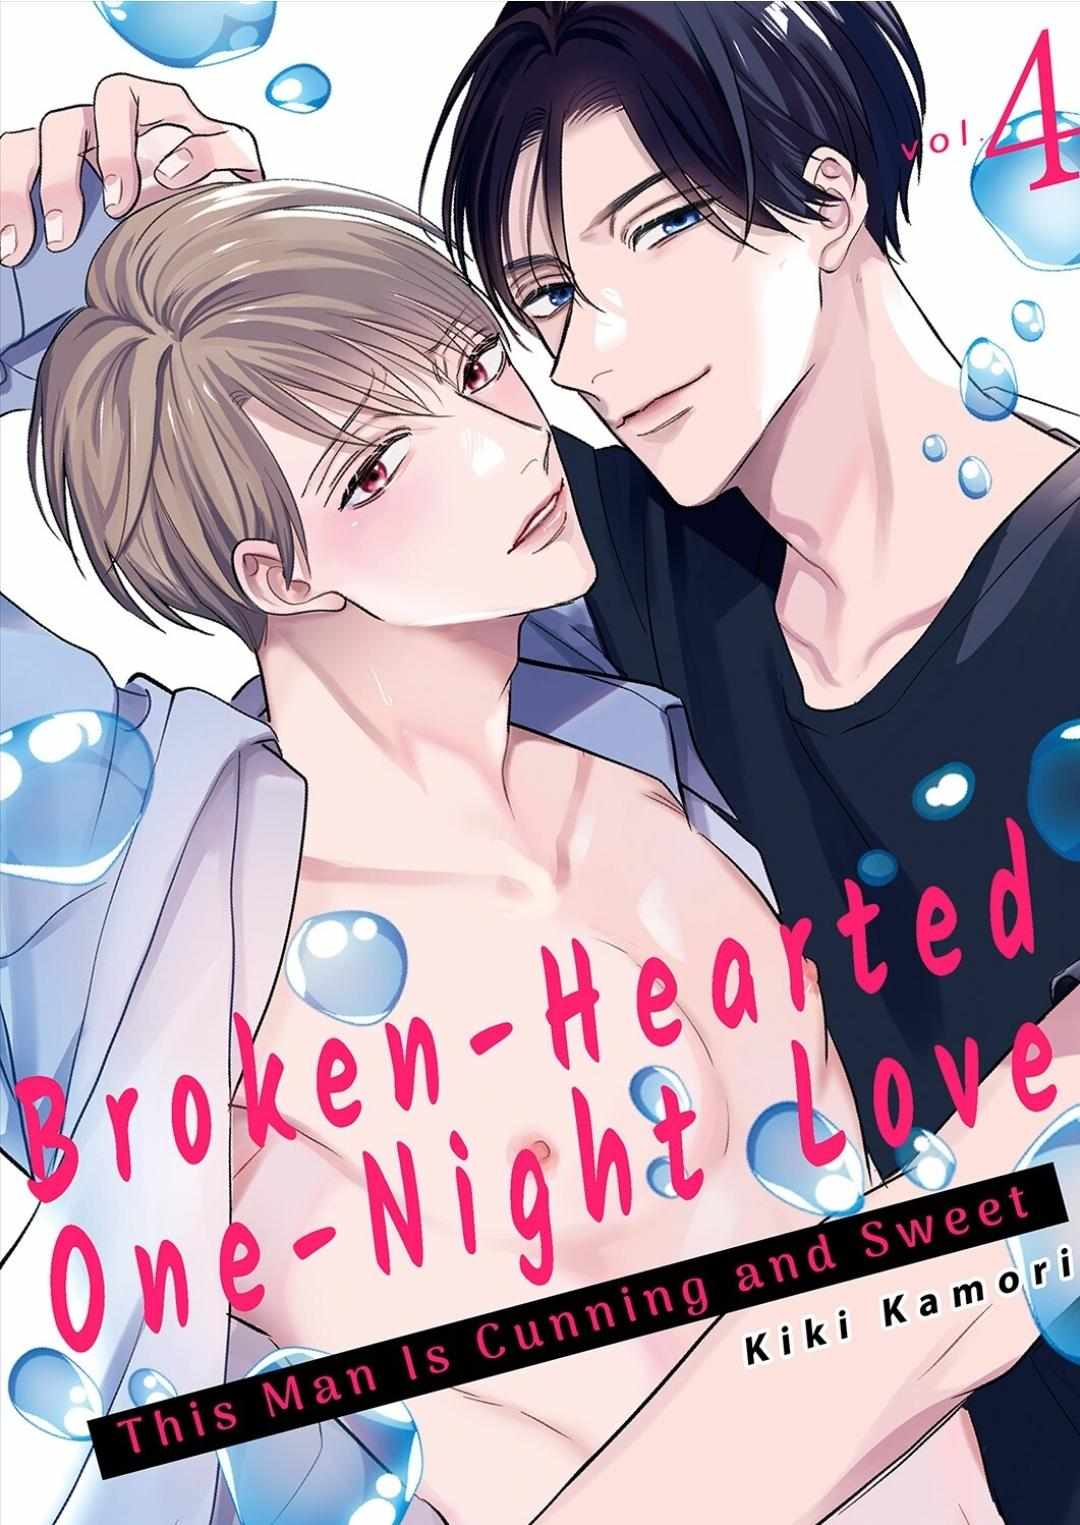 Broken-Hearted One-Night Love ~This Man Is Cunning and Sweet~ - chapter 4 - #1